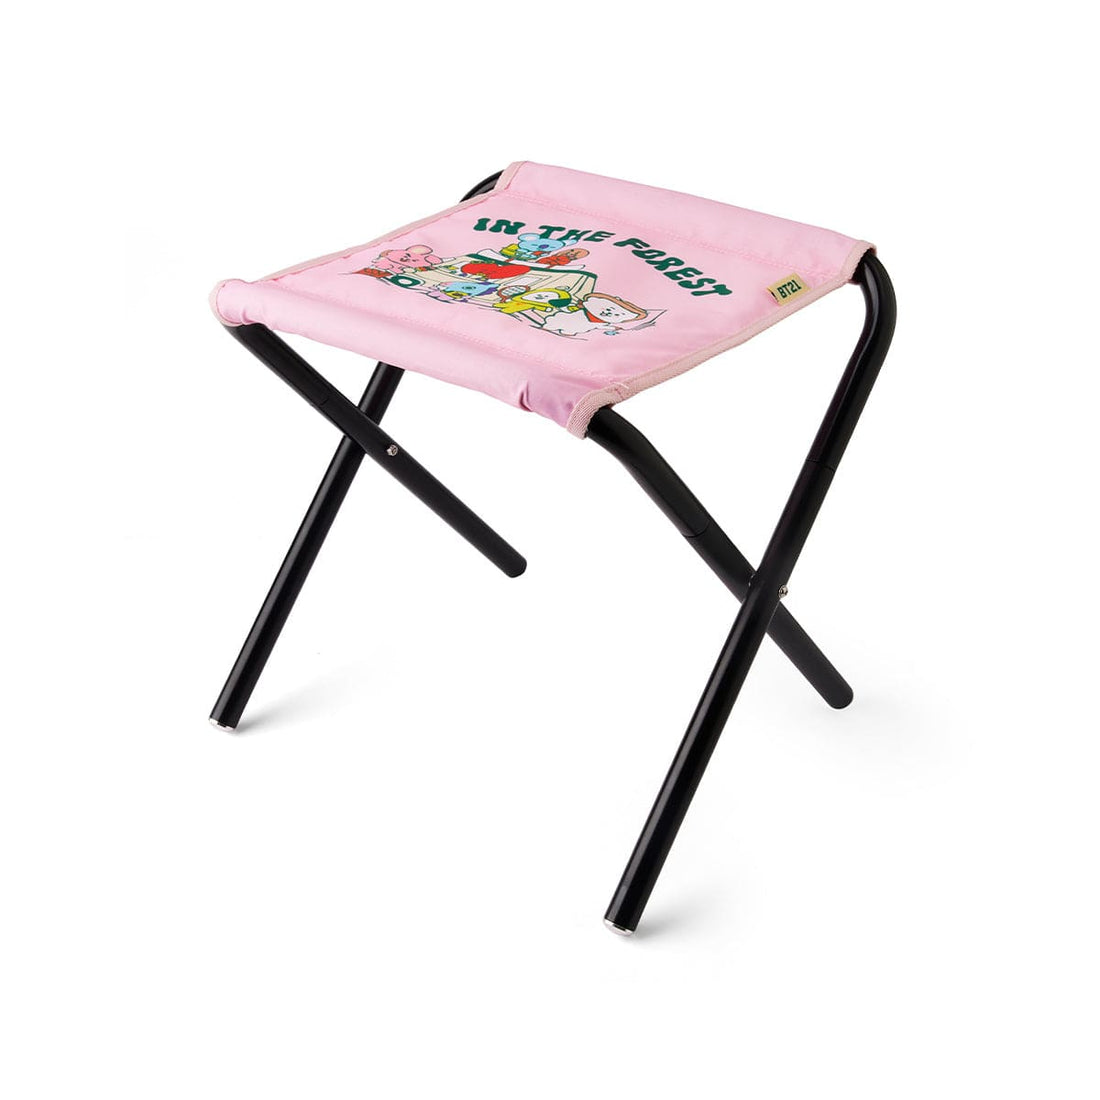 LINE FRIENDS HOUSEHOLD FOLDABLE CHAIR BT21 PICNIC FOLDABLE CHAIR